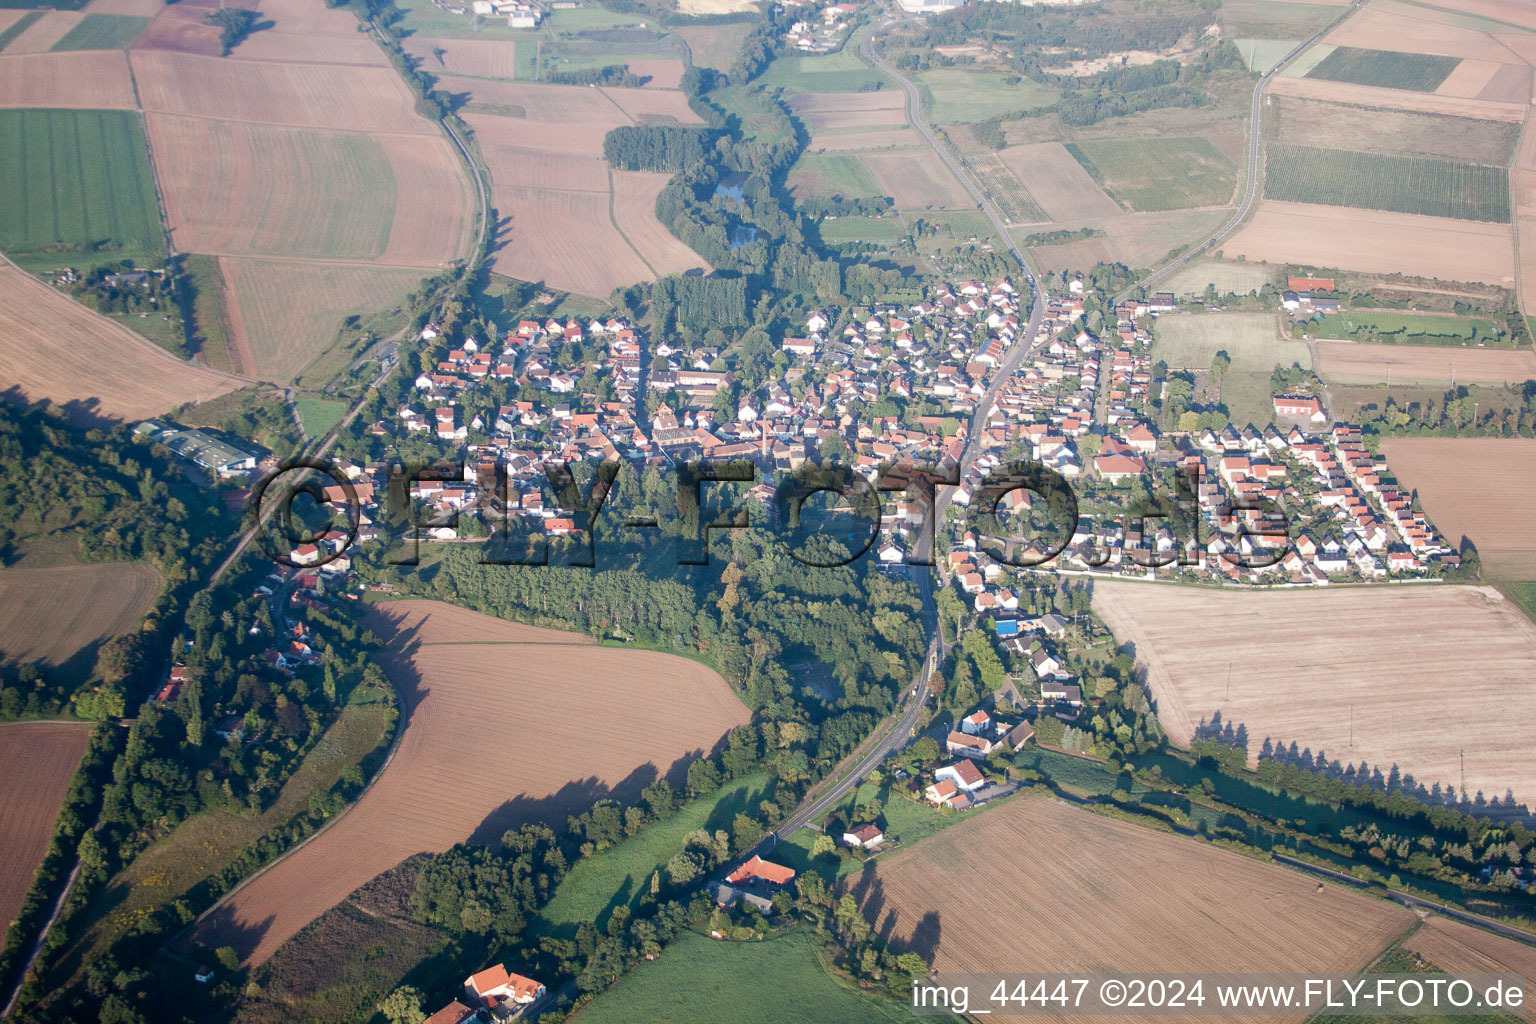 Aerial view of Village - view on the edge of agricultural fields and farmland in Ebertsheim in the state Rhineland-Palatinate